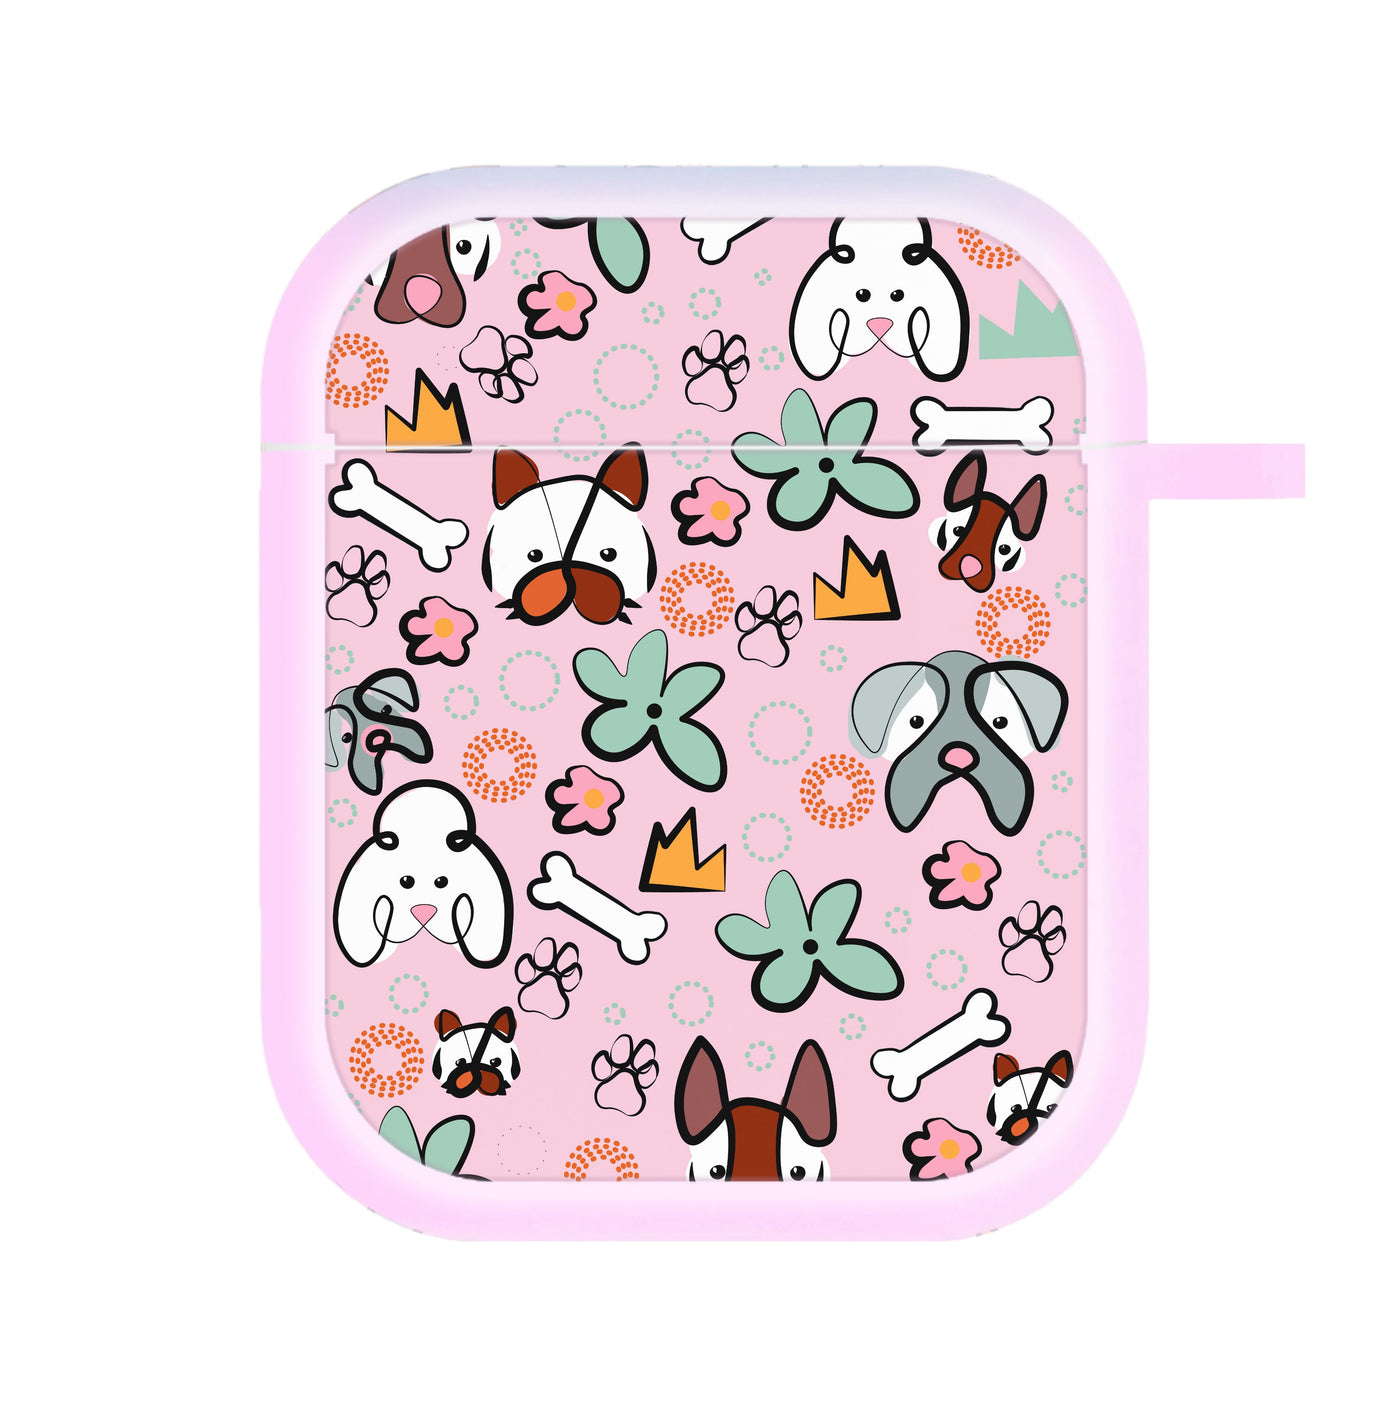 Bones and dogs - Dog Patterns AirPods Case